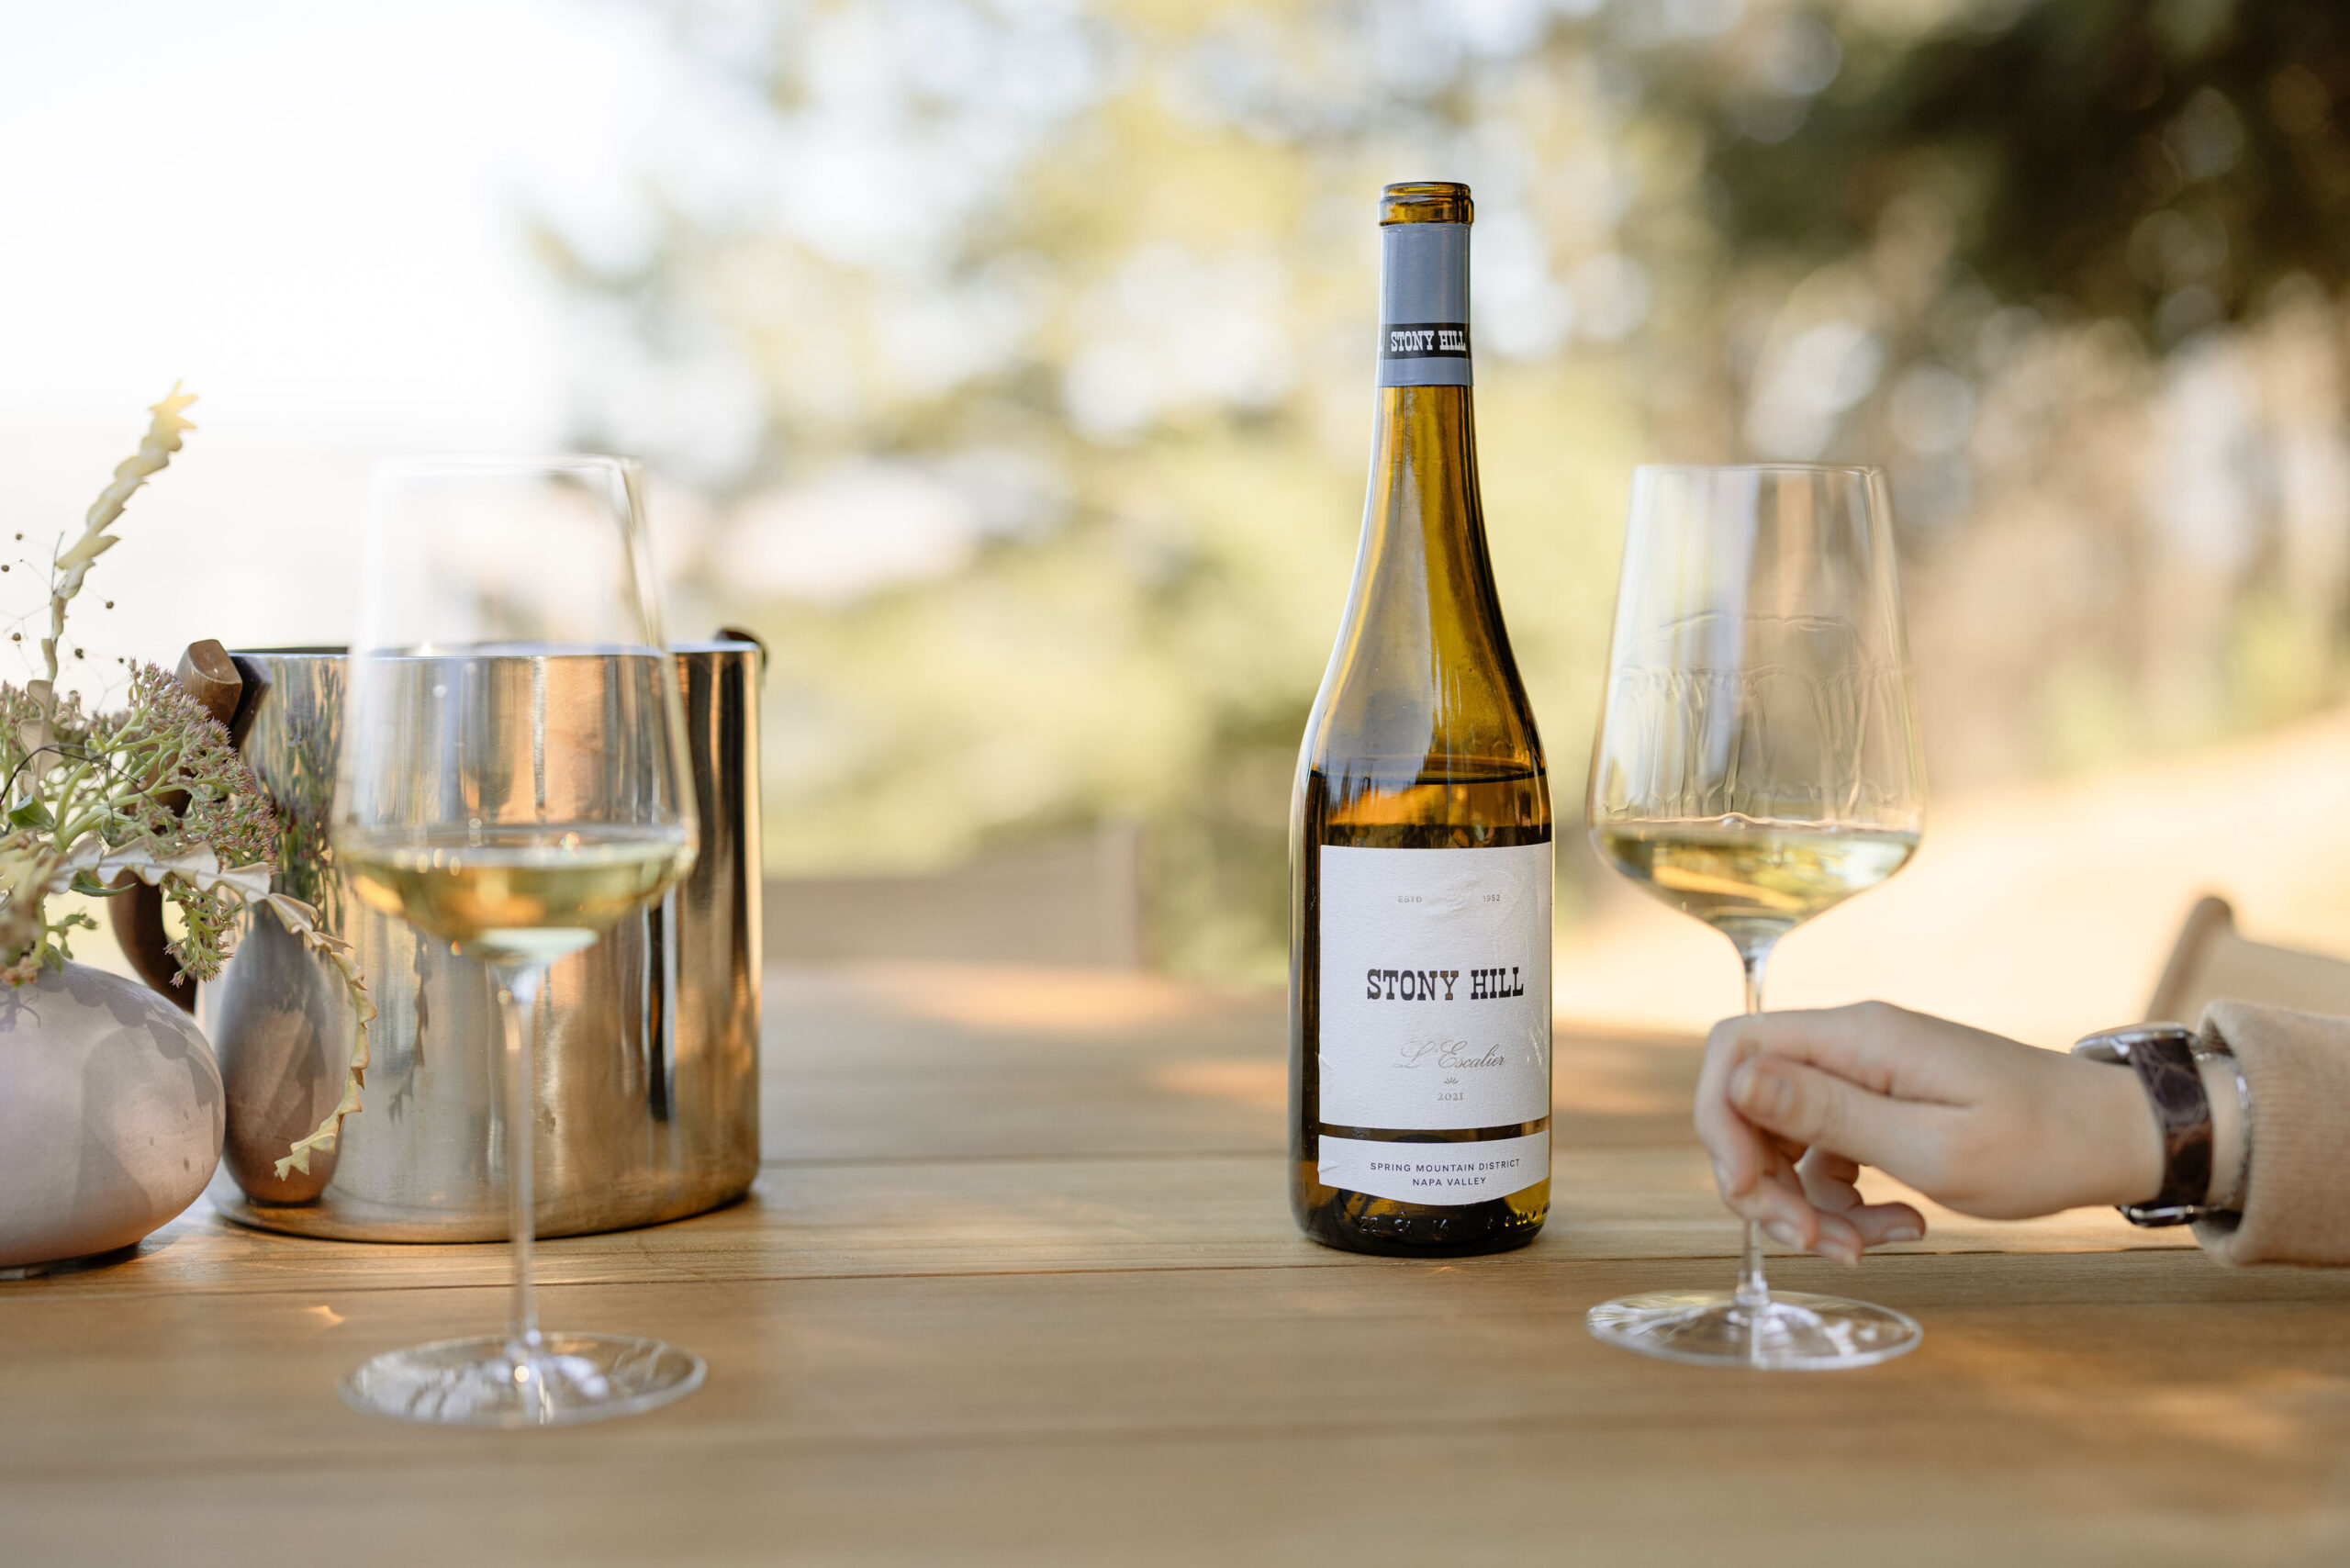 A view of a table outdoors with a hand holding a glass of wine next to a bottle of Stony Hill wine.